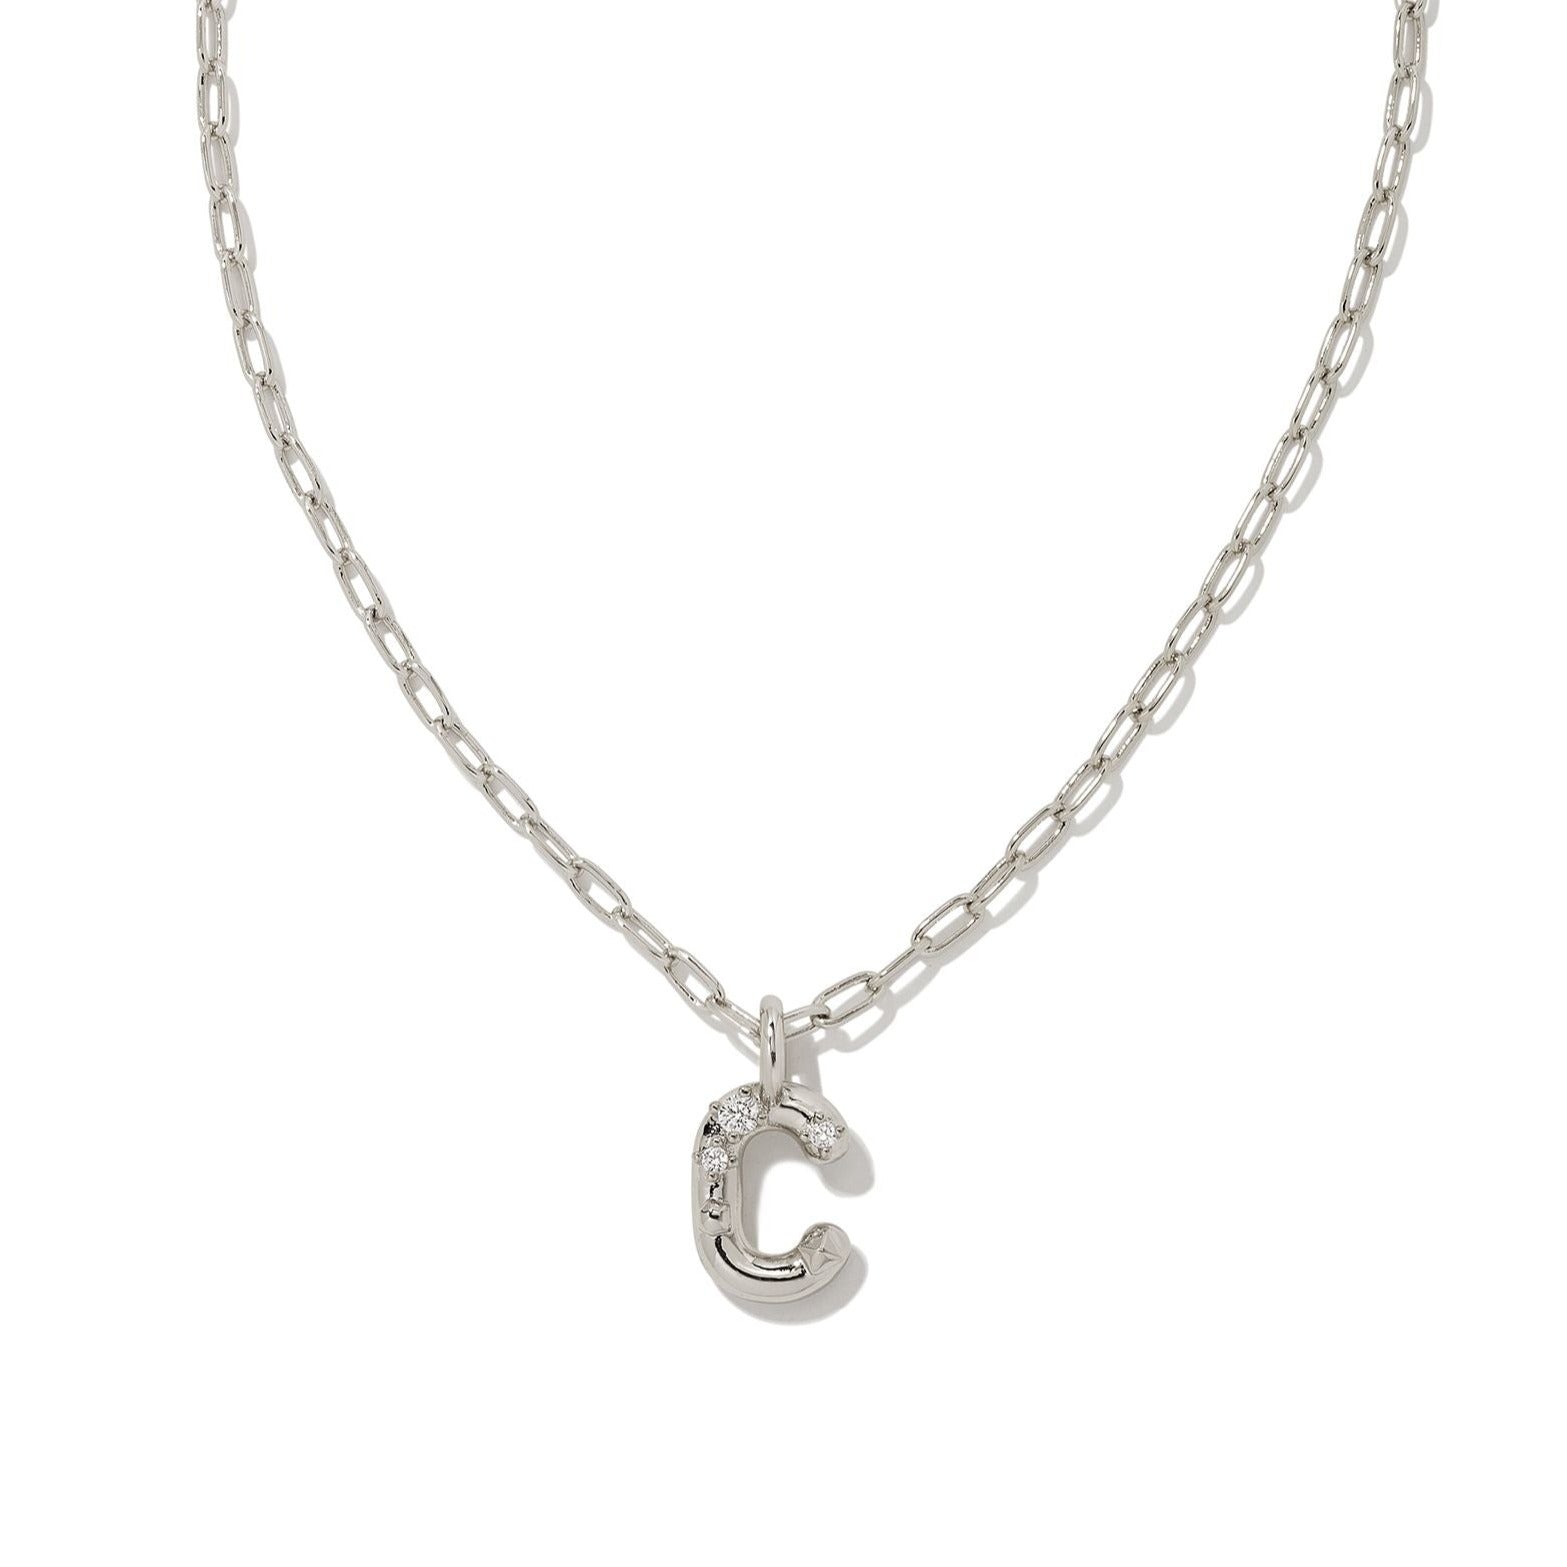 Kendra Scott | Crystal Letter Silver Short Pendant Necklace in White Crystal - Giddy Up Glamour Boutique